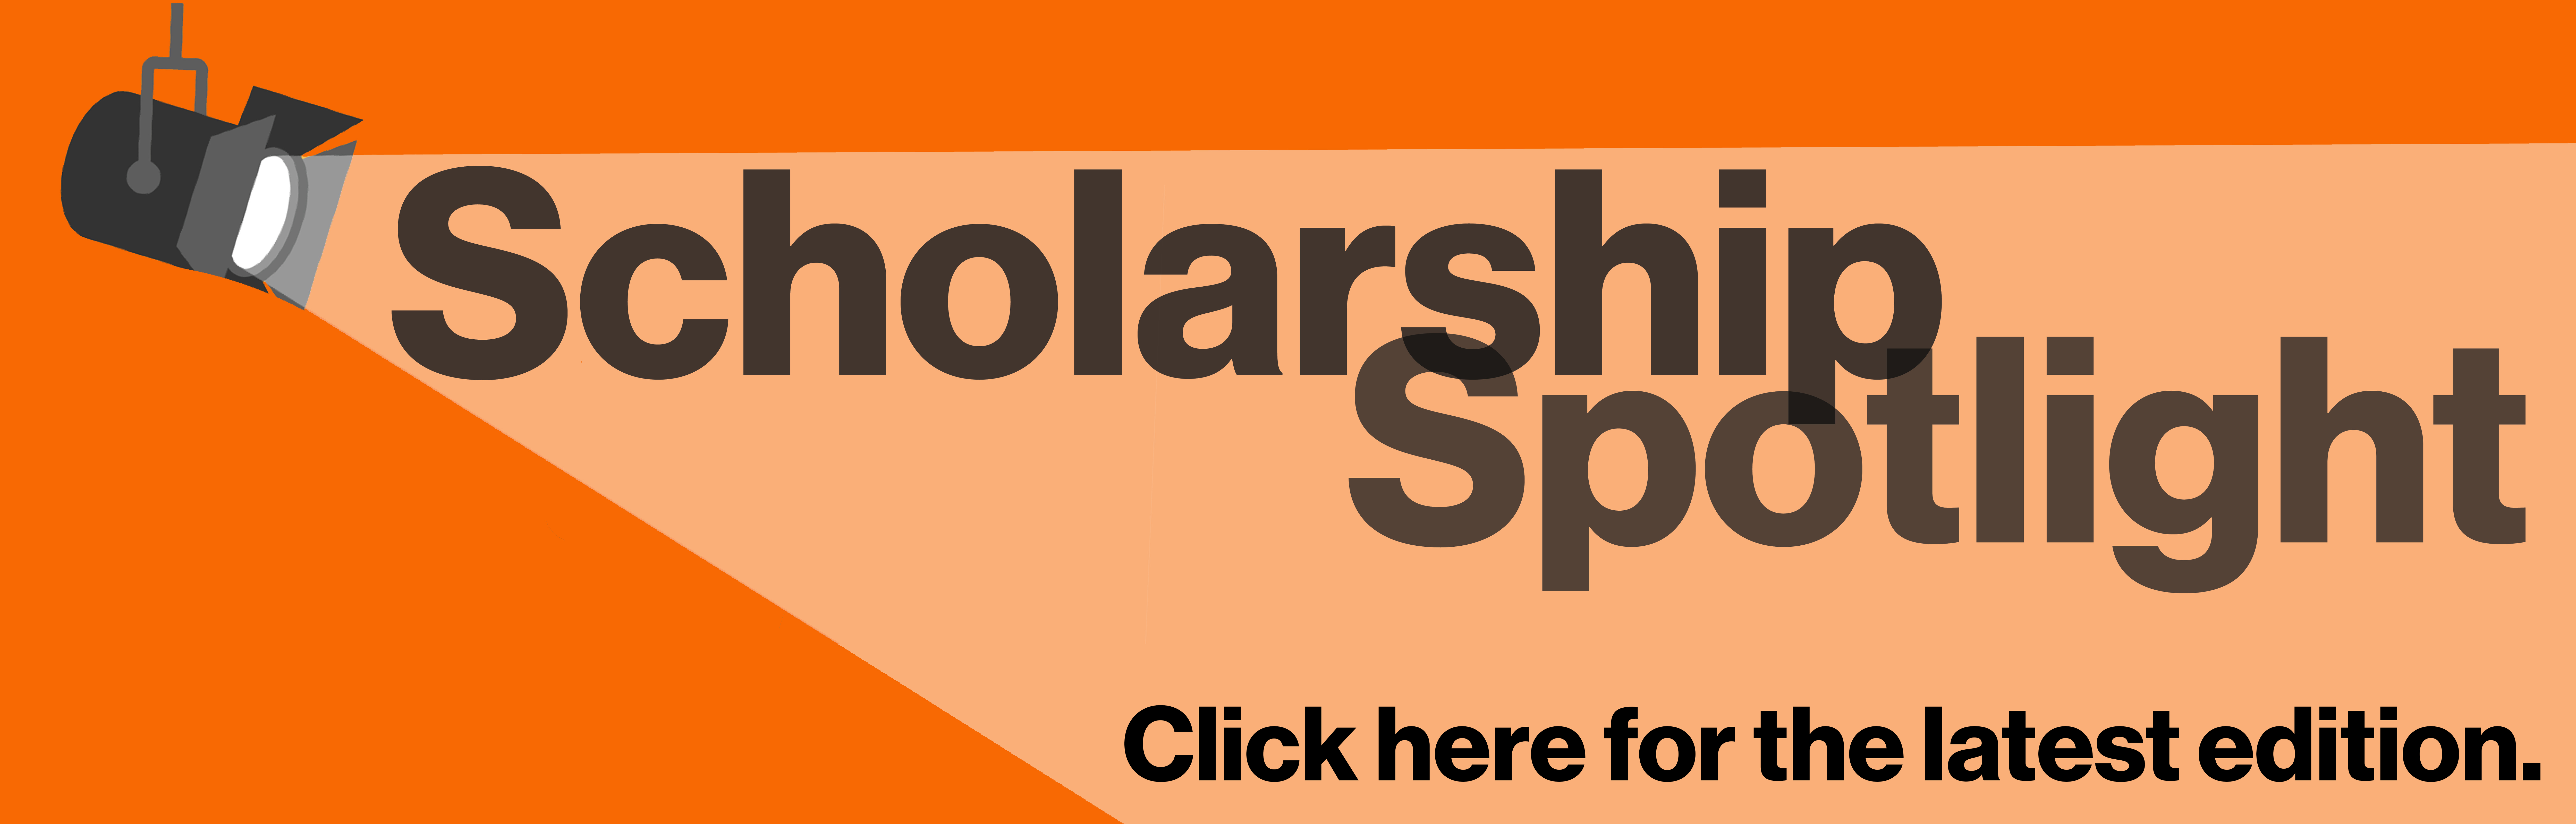 Scholarship Spotlight Banner - Click here for the latest edition